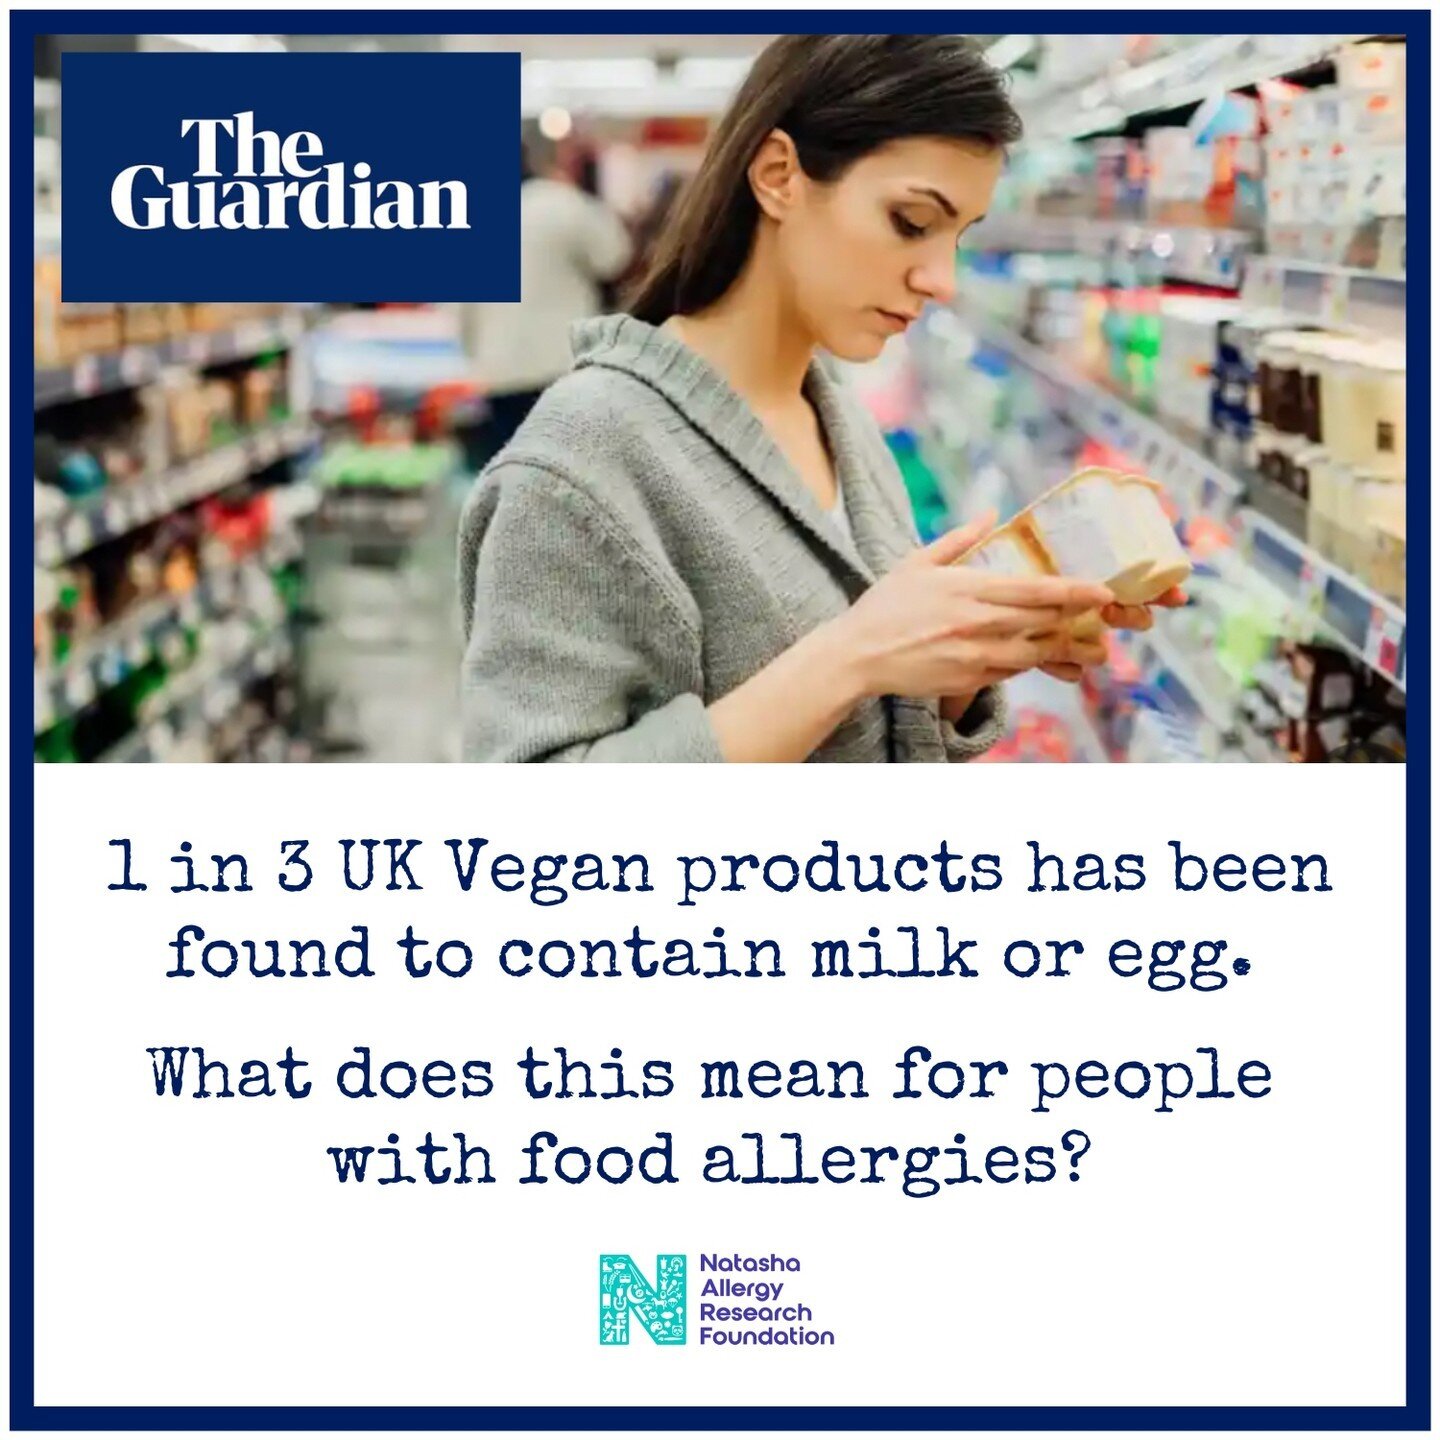 The Guardian newspaper reported that more than one-third of UK foods labelled as vegan contain animal products, namely milk and egg. This has understandably sent shock waves through both vegan and allergic communities.

Consumers rely on &lsquo;vegan